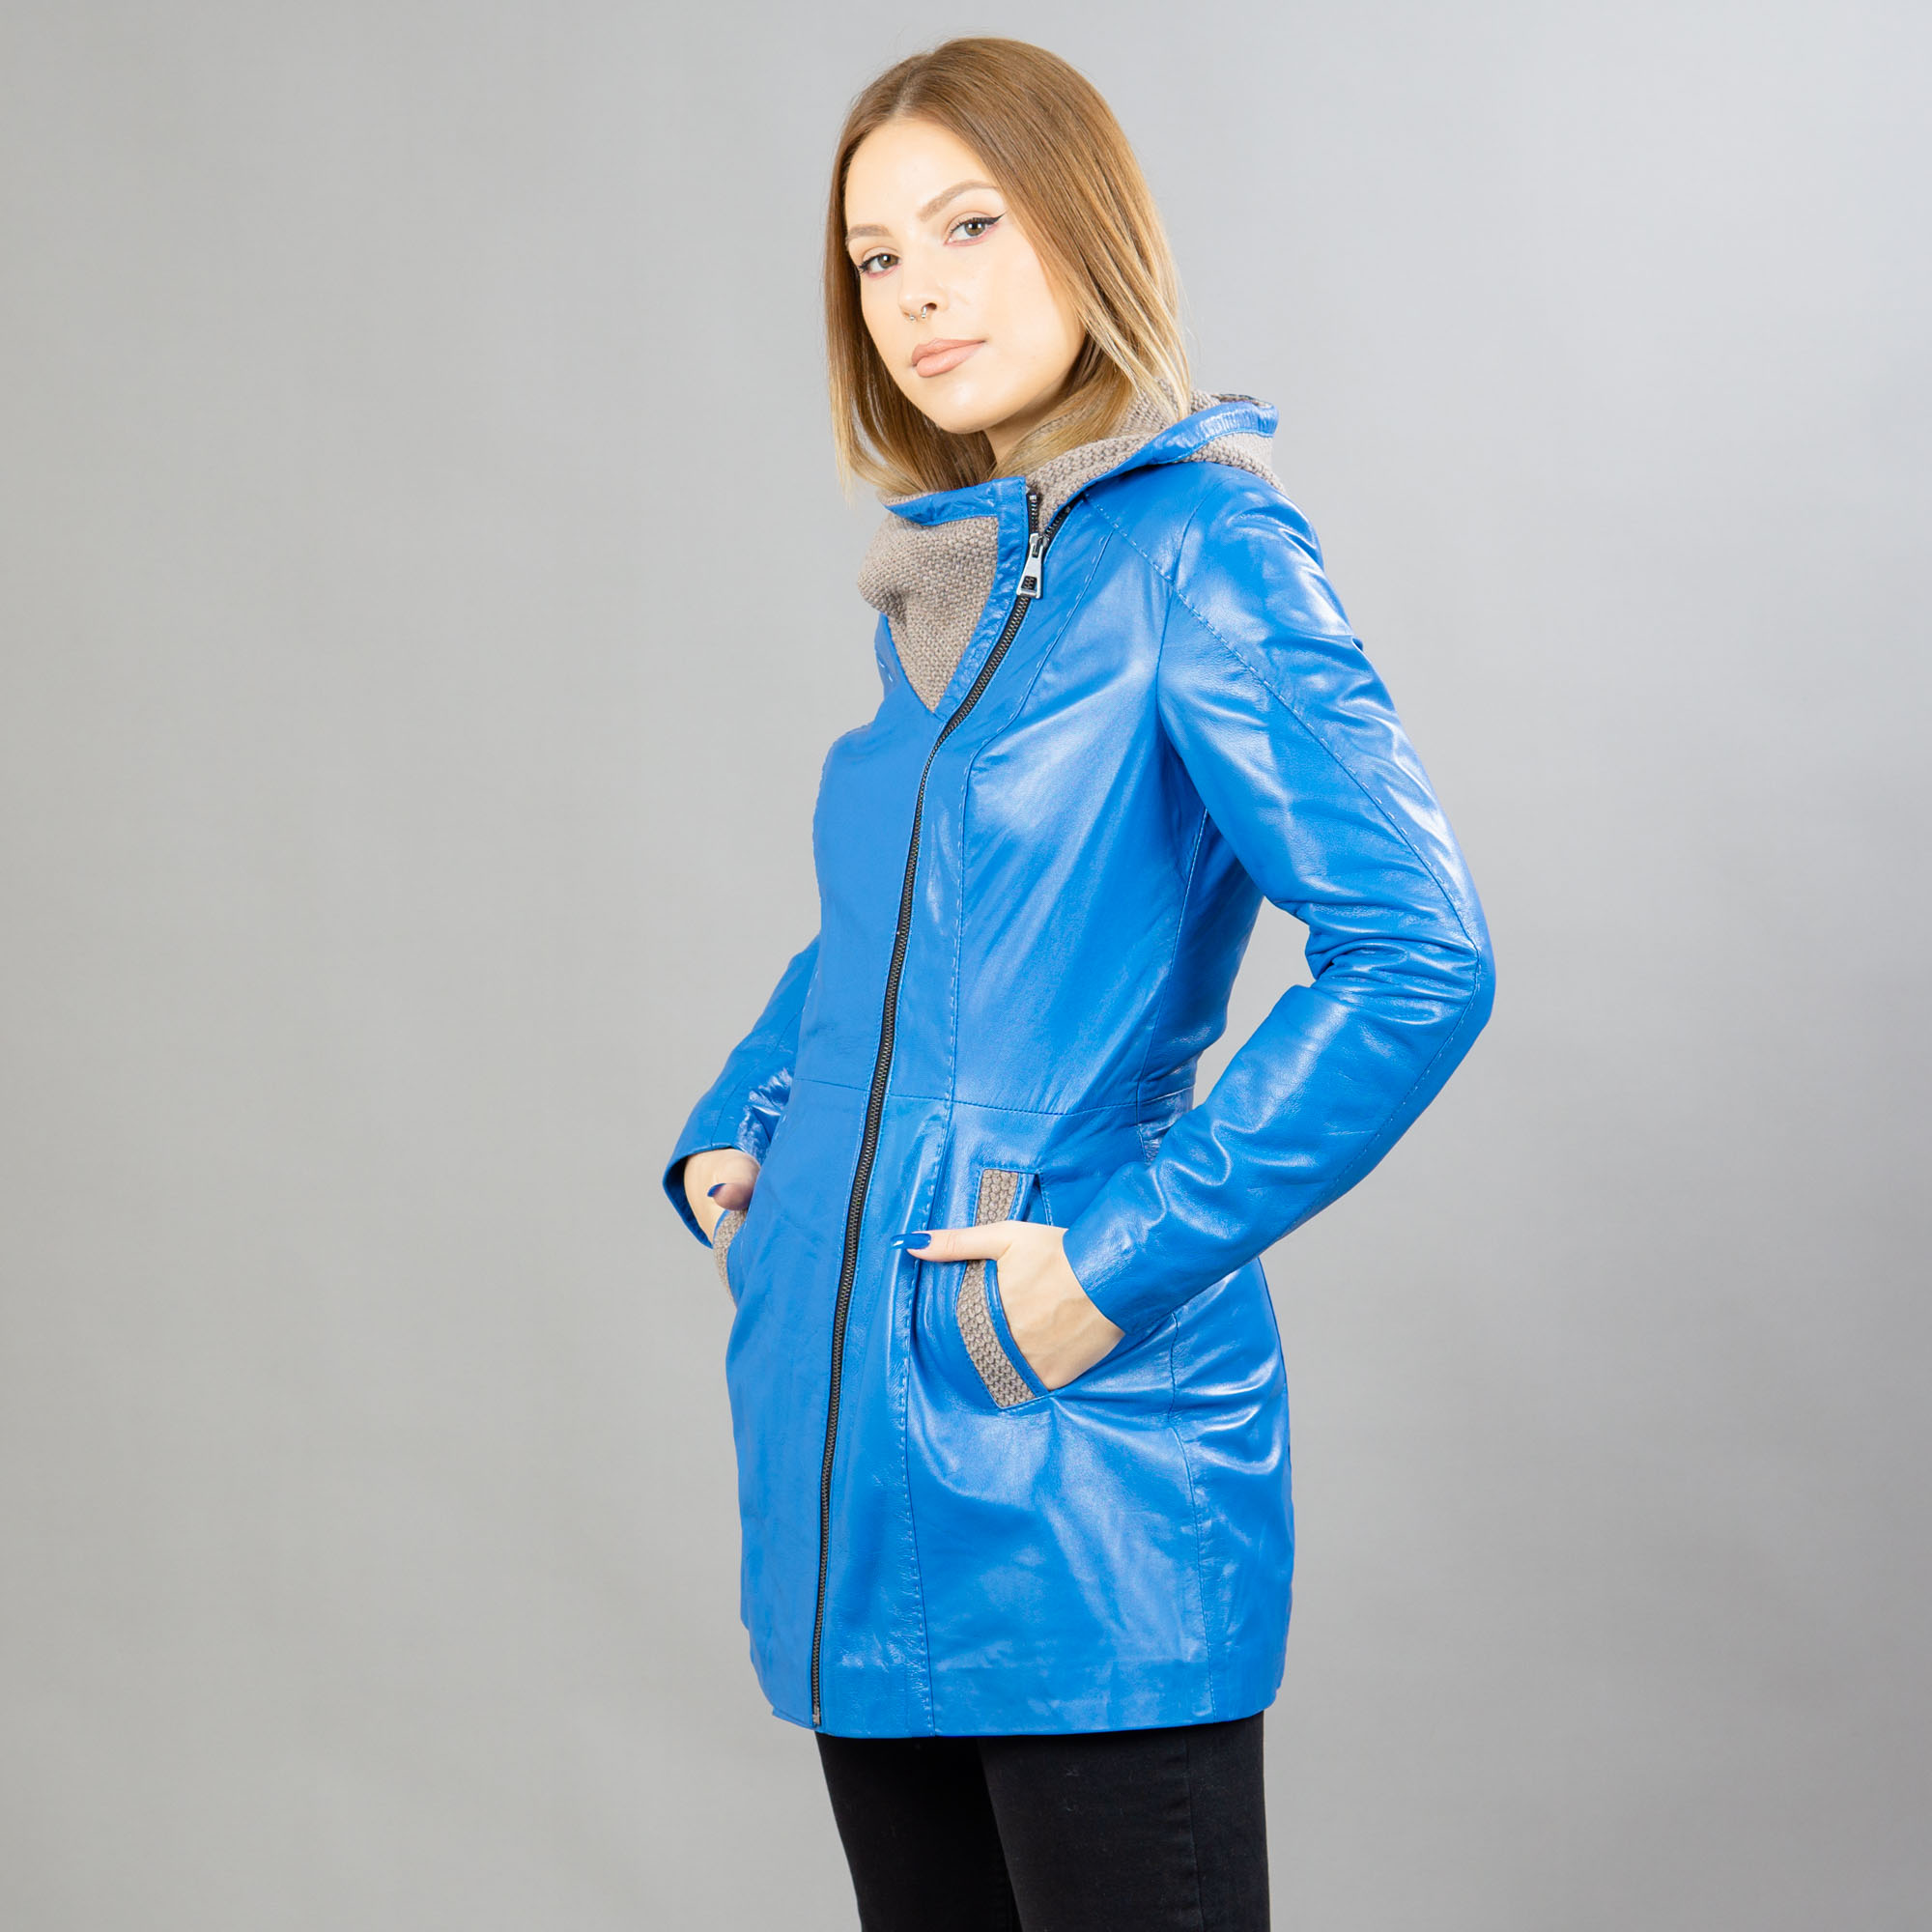 blue leather jacket with a hood